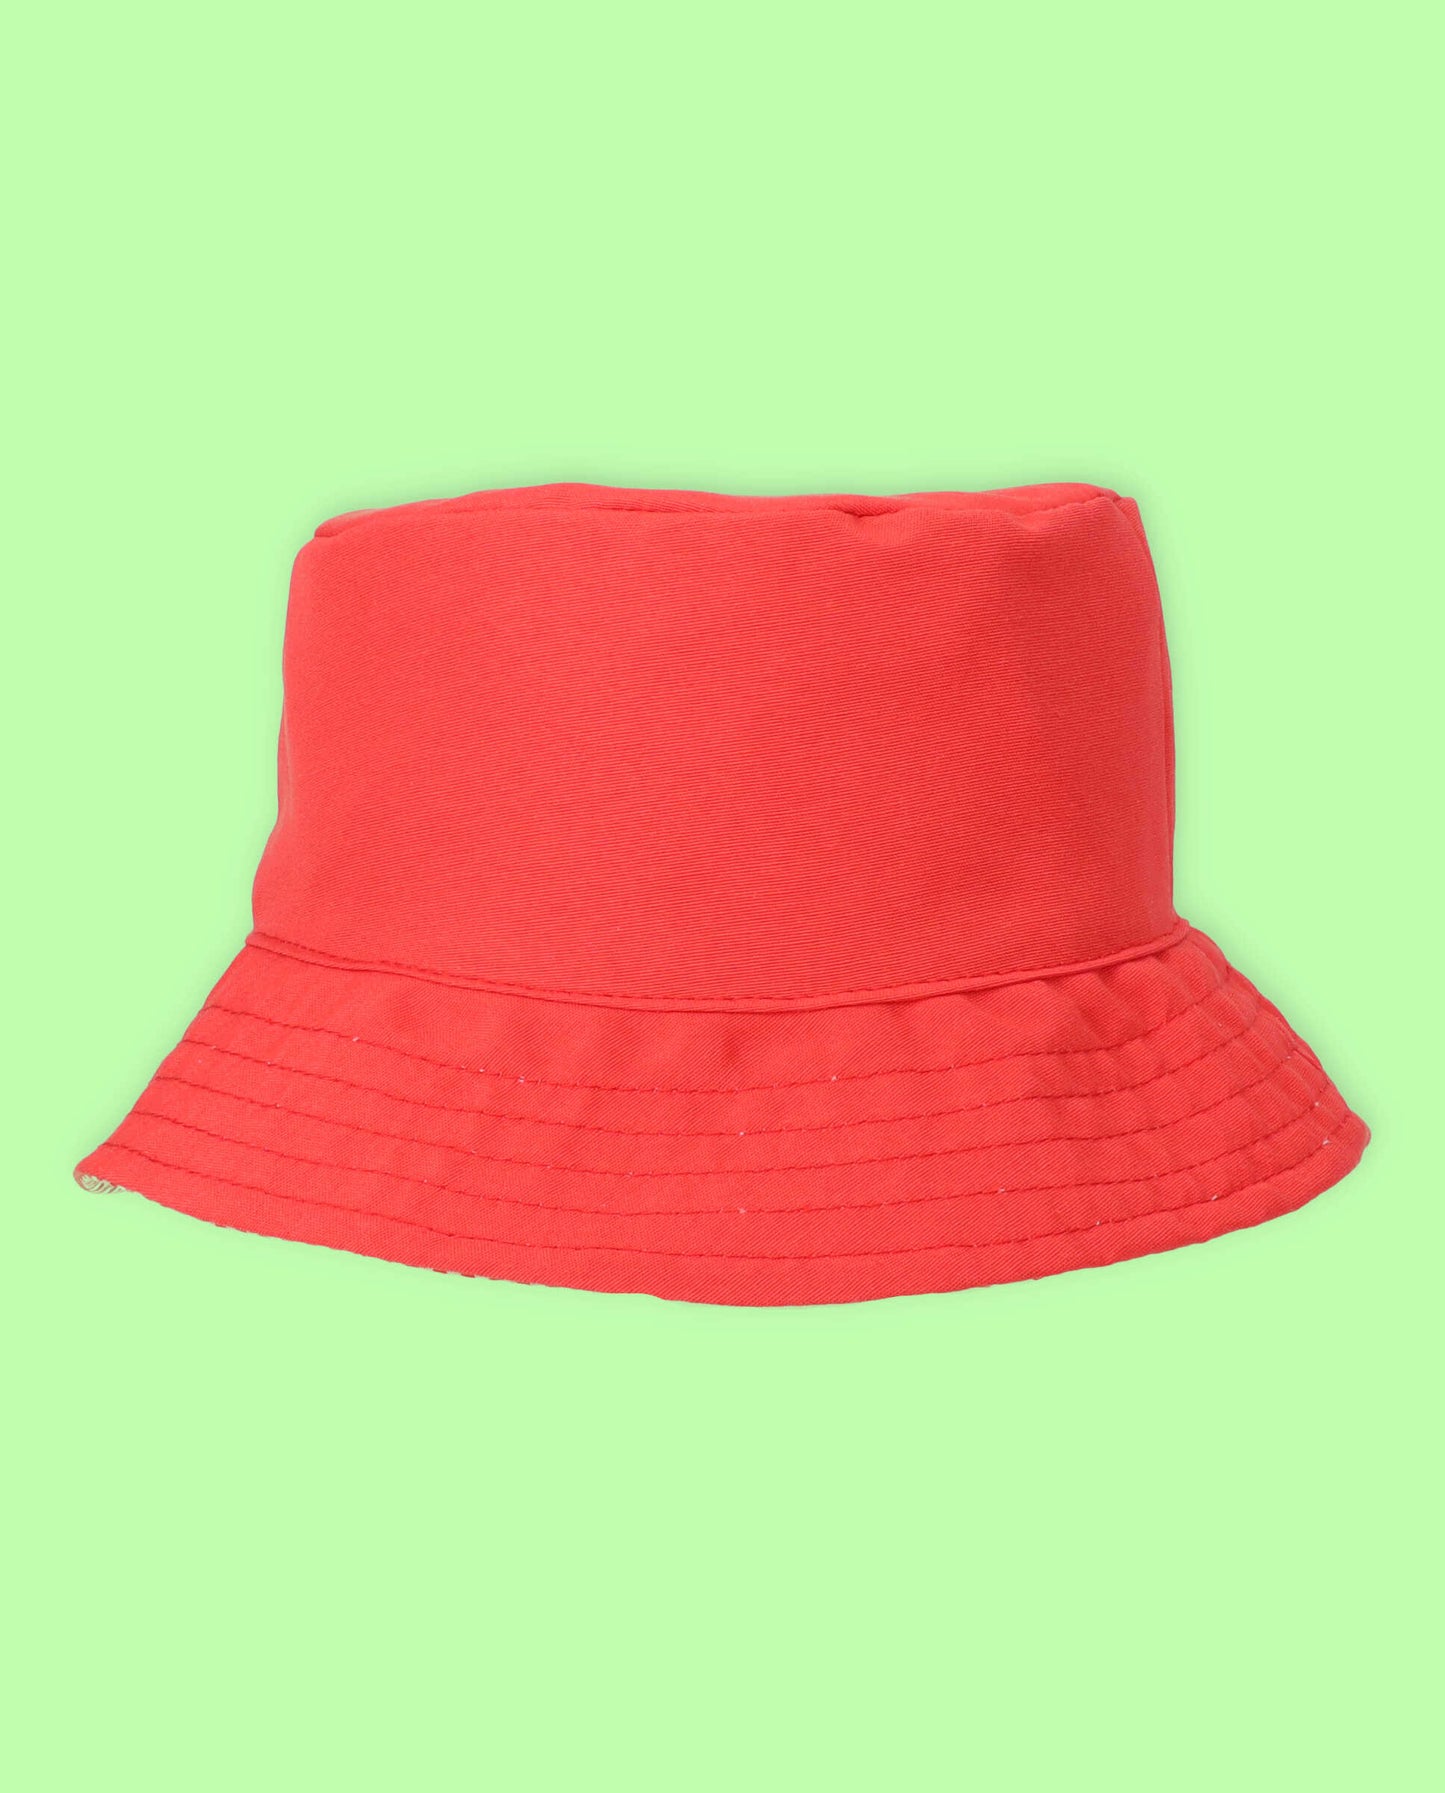 Reversible two-tone orange and red hat